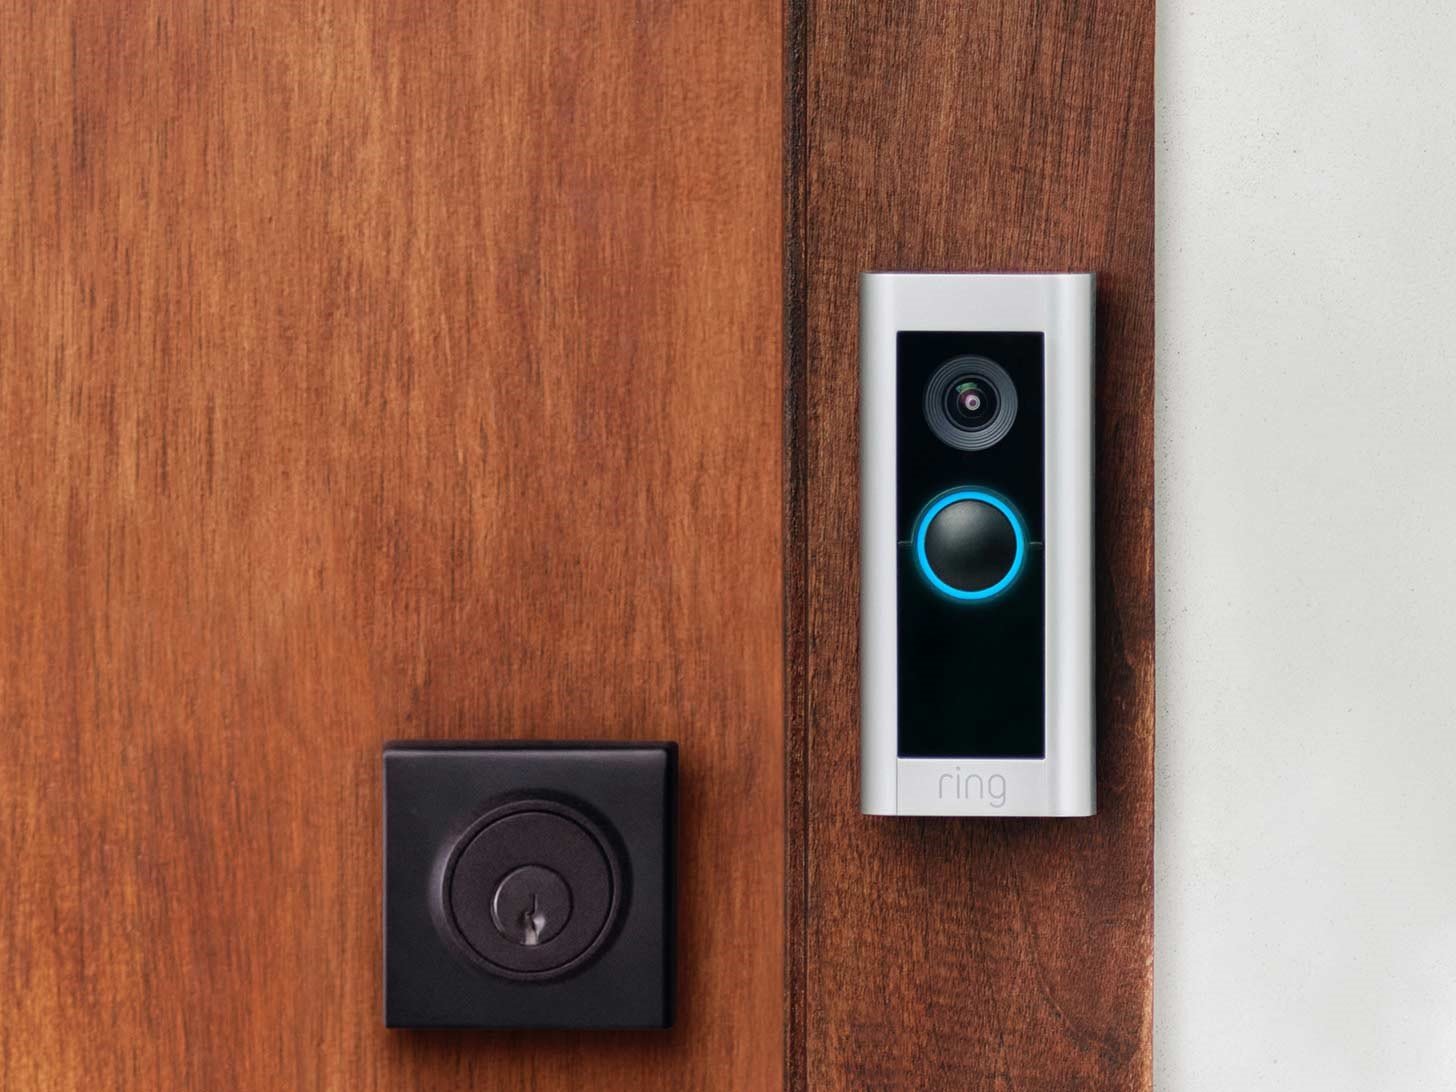 Doorbells should also be smart. Here are our recommendations for the best Ring doorbells!